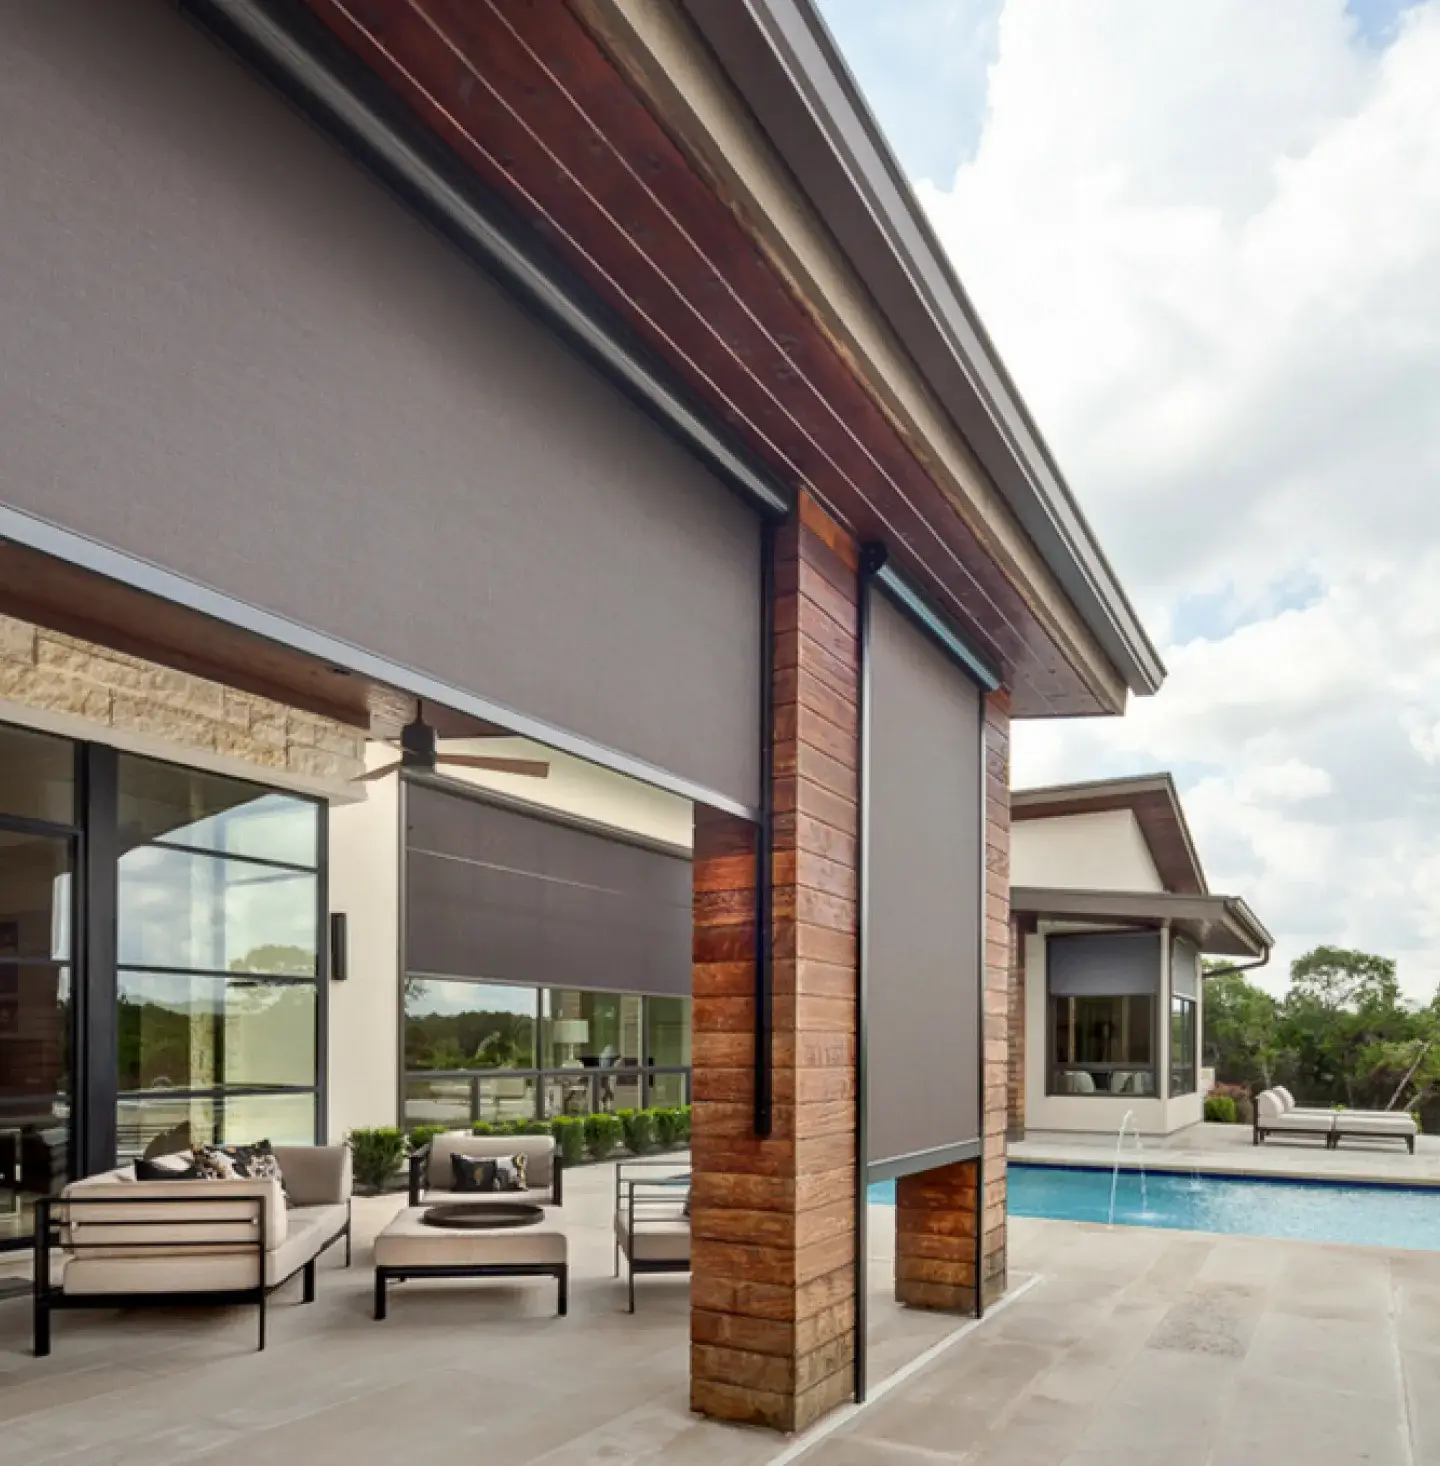 Backyard of a home with custom designed and built exterior screens on the windows.